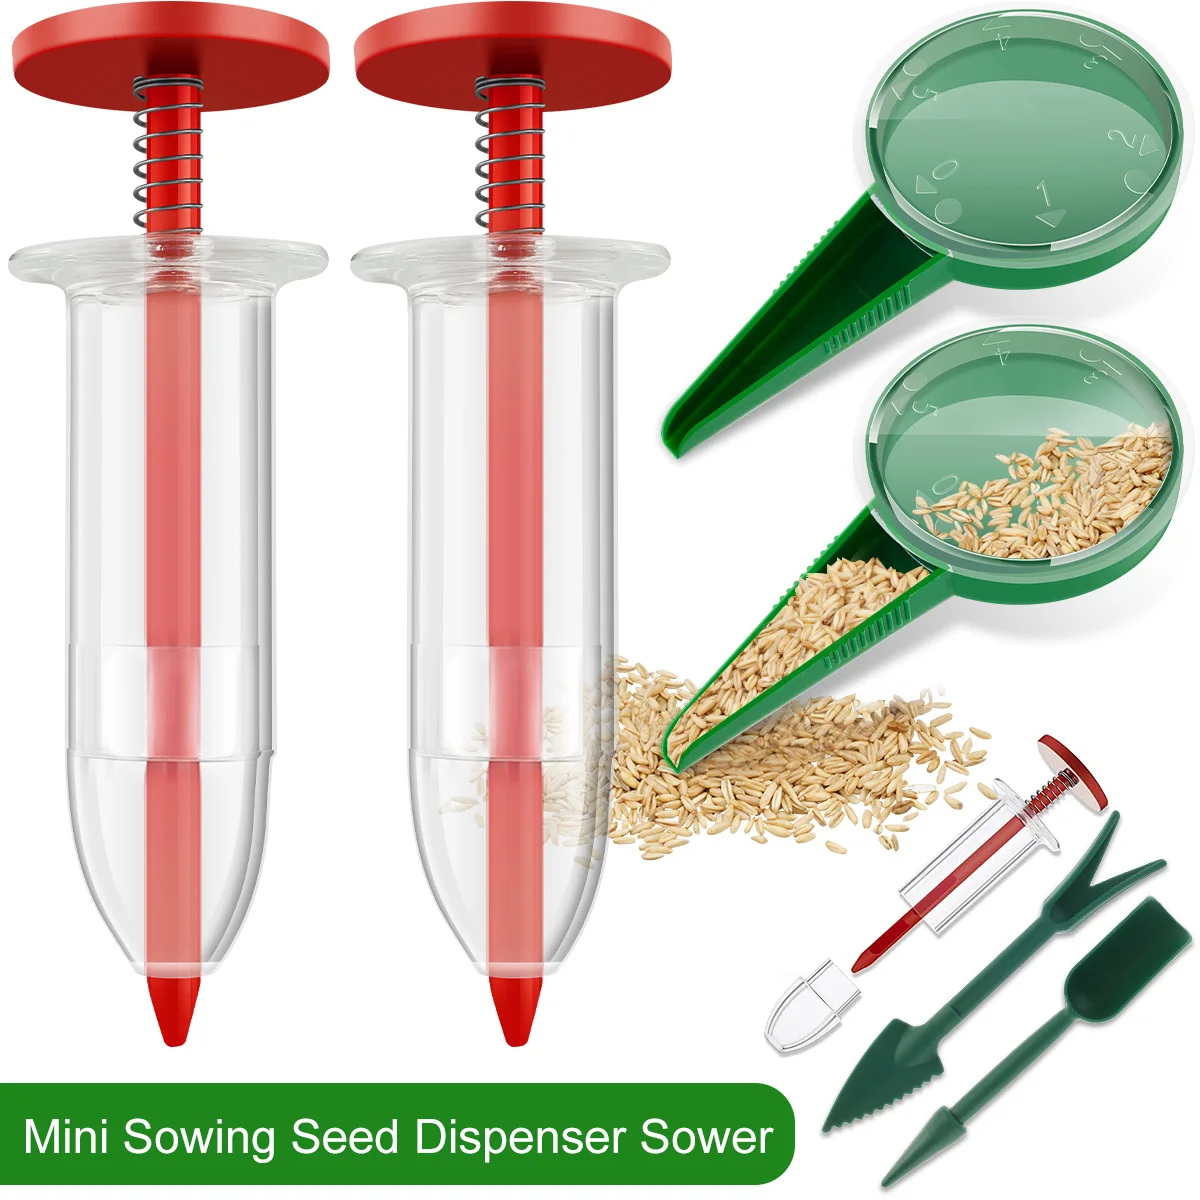 

6pcs Mini Sowing Seed Dispenser Sower Set Planter Manual Seeding Tools Practical Small Seed Spreader Flower Bed Gardening Tool